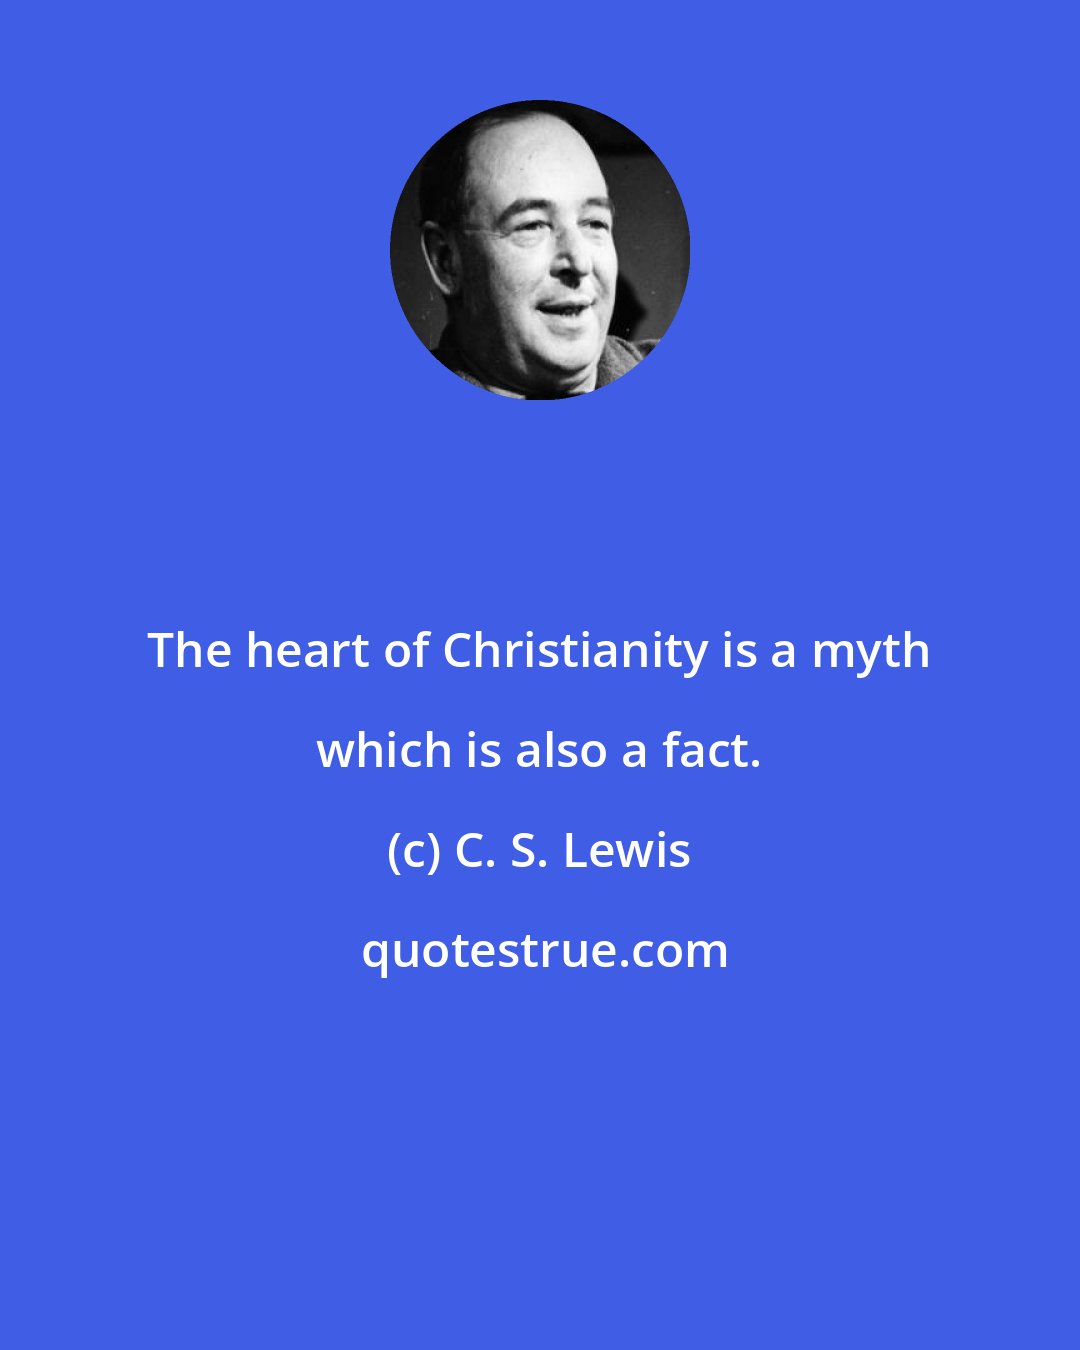 C. S. Lewis: The heart of Christianity is a myth which is also a fact.